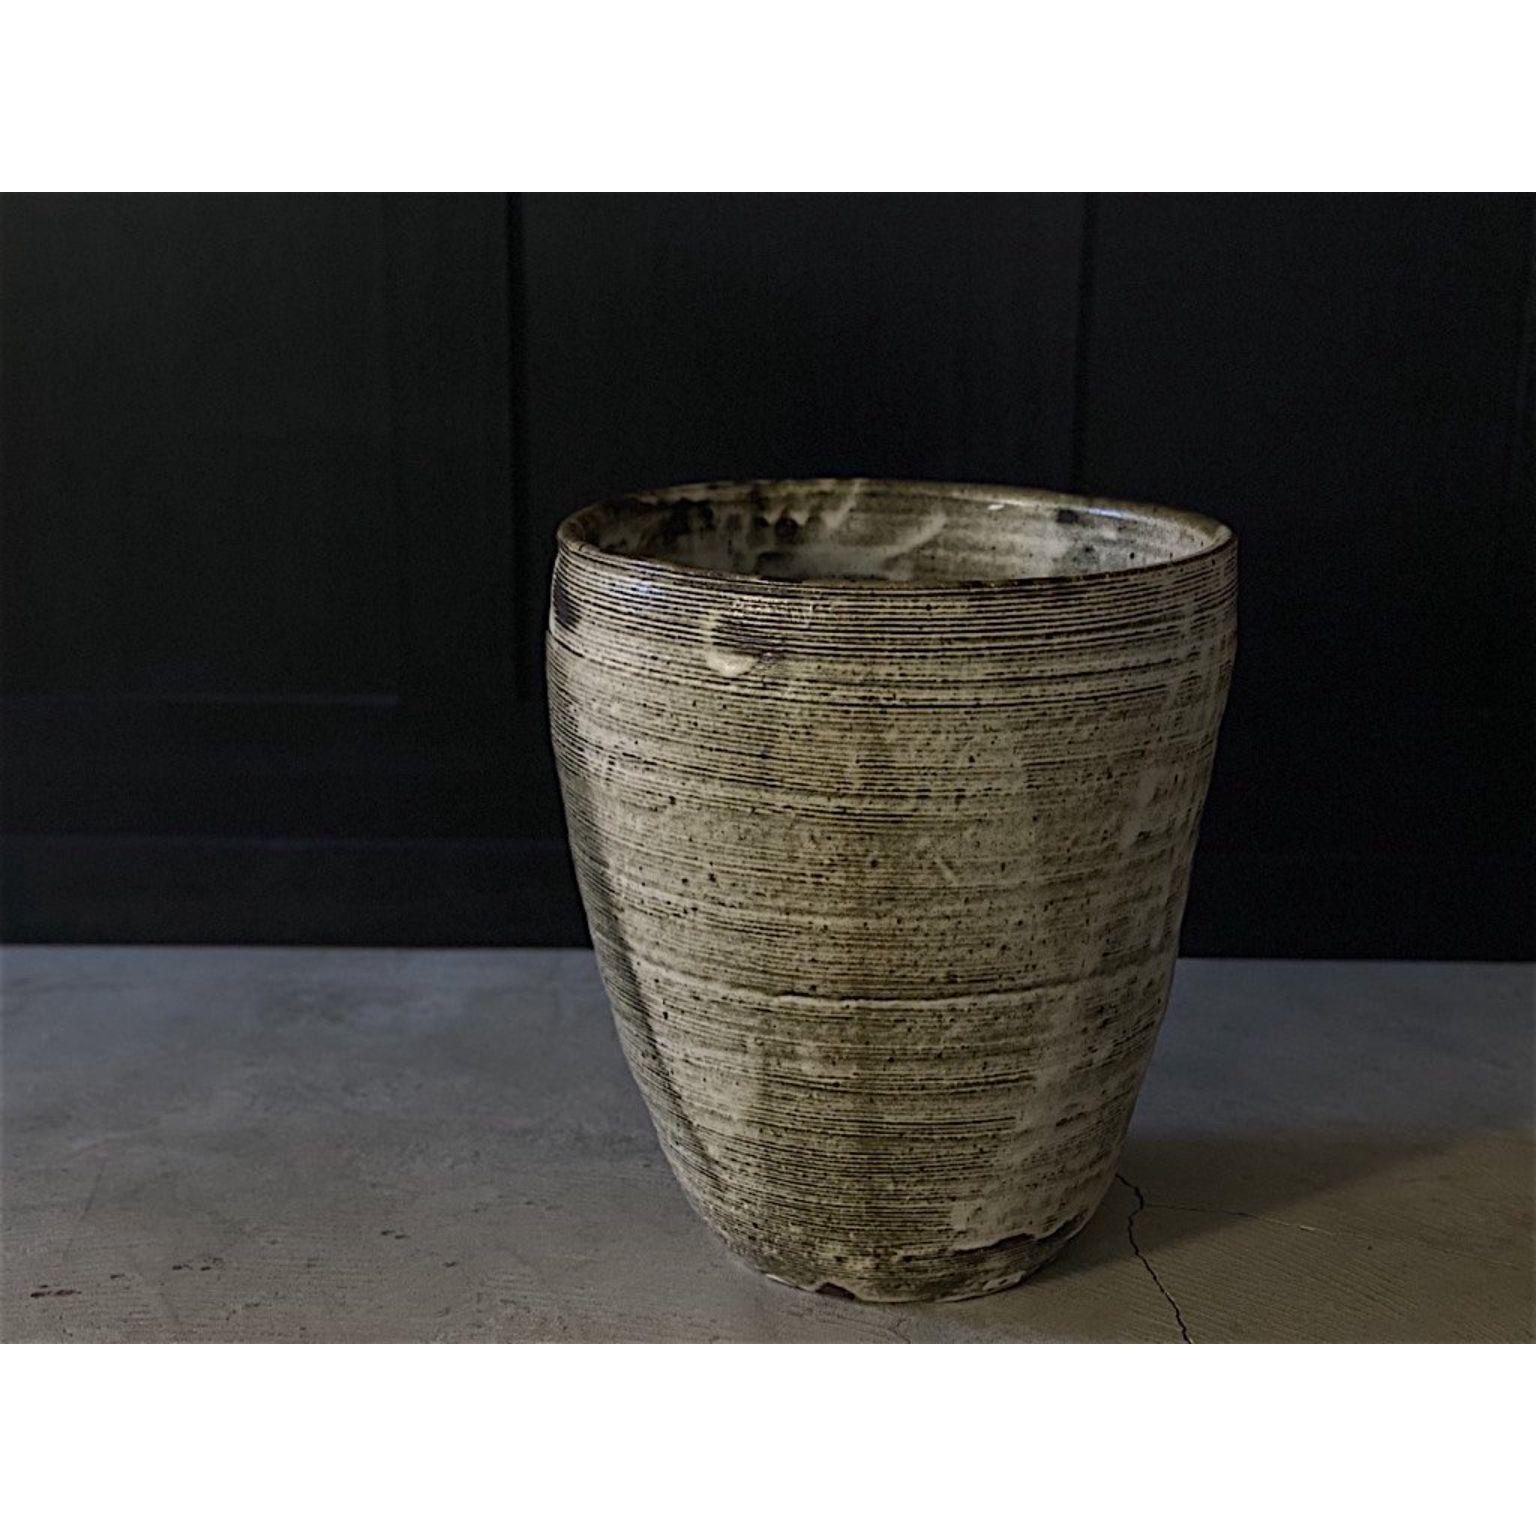 Contemporary Handcrafted Vase #2 by Teppei Ono